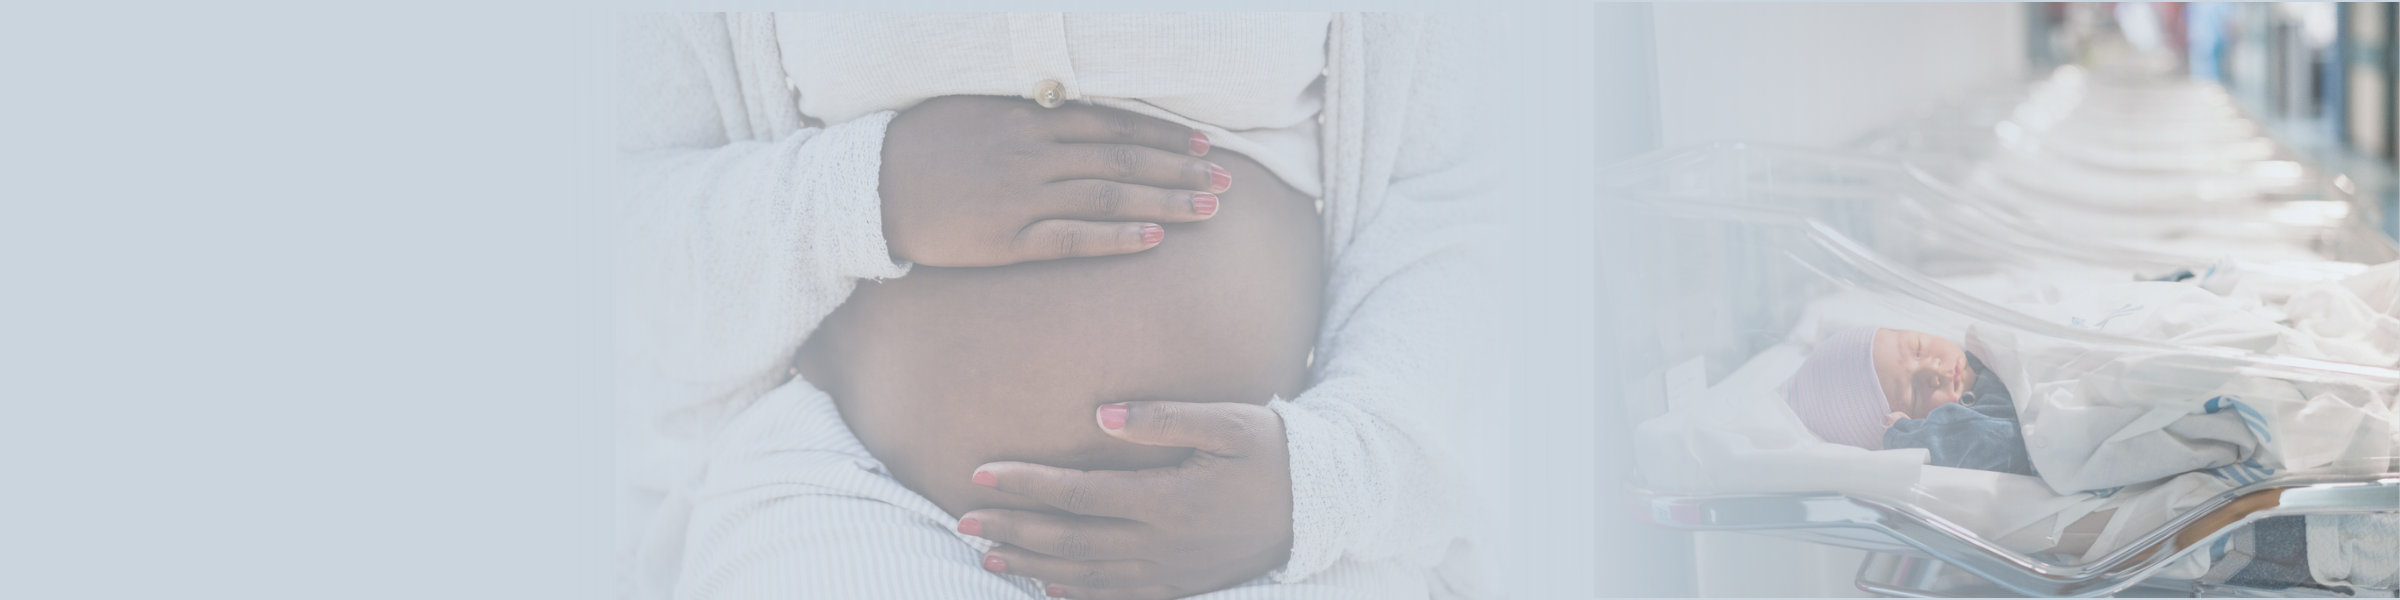 Black pregnant person holding their stomach, newborn in hospital bassinet